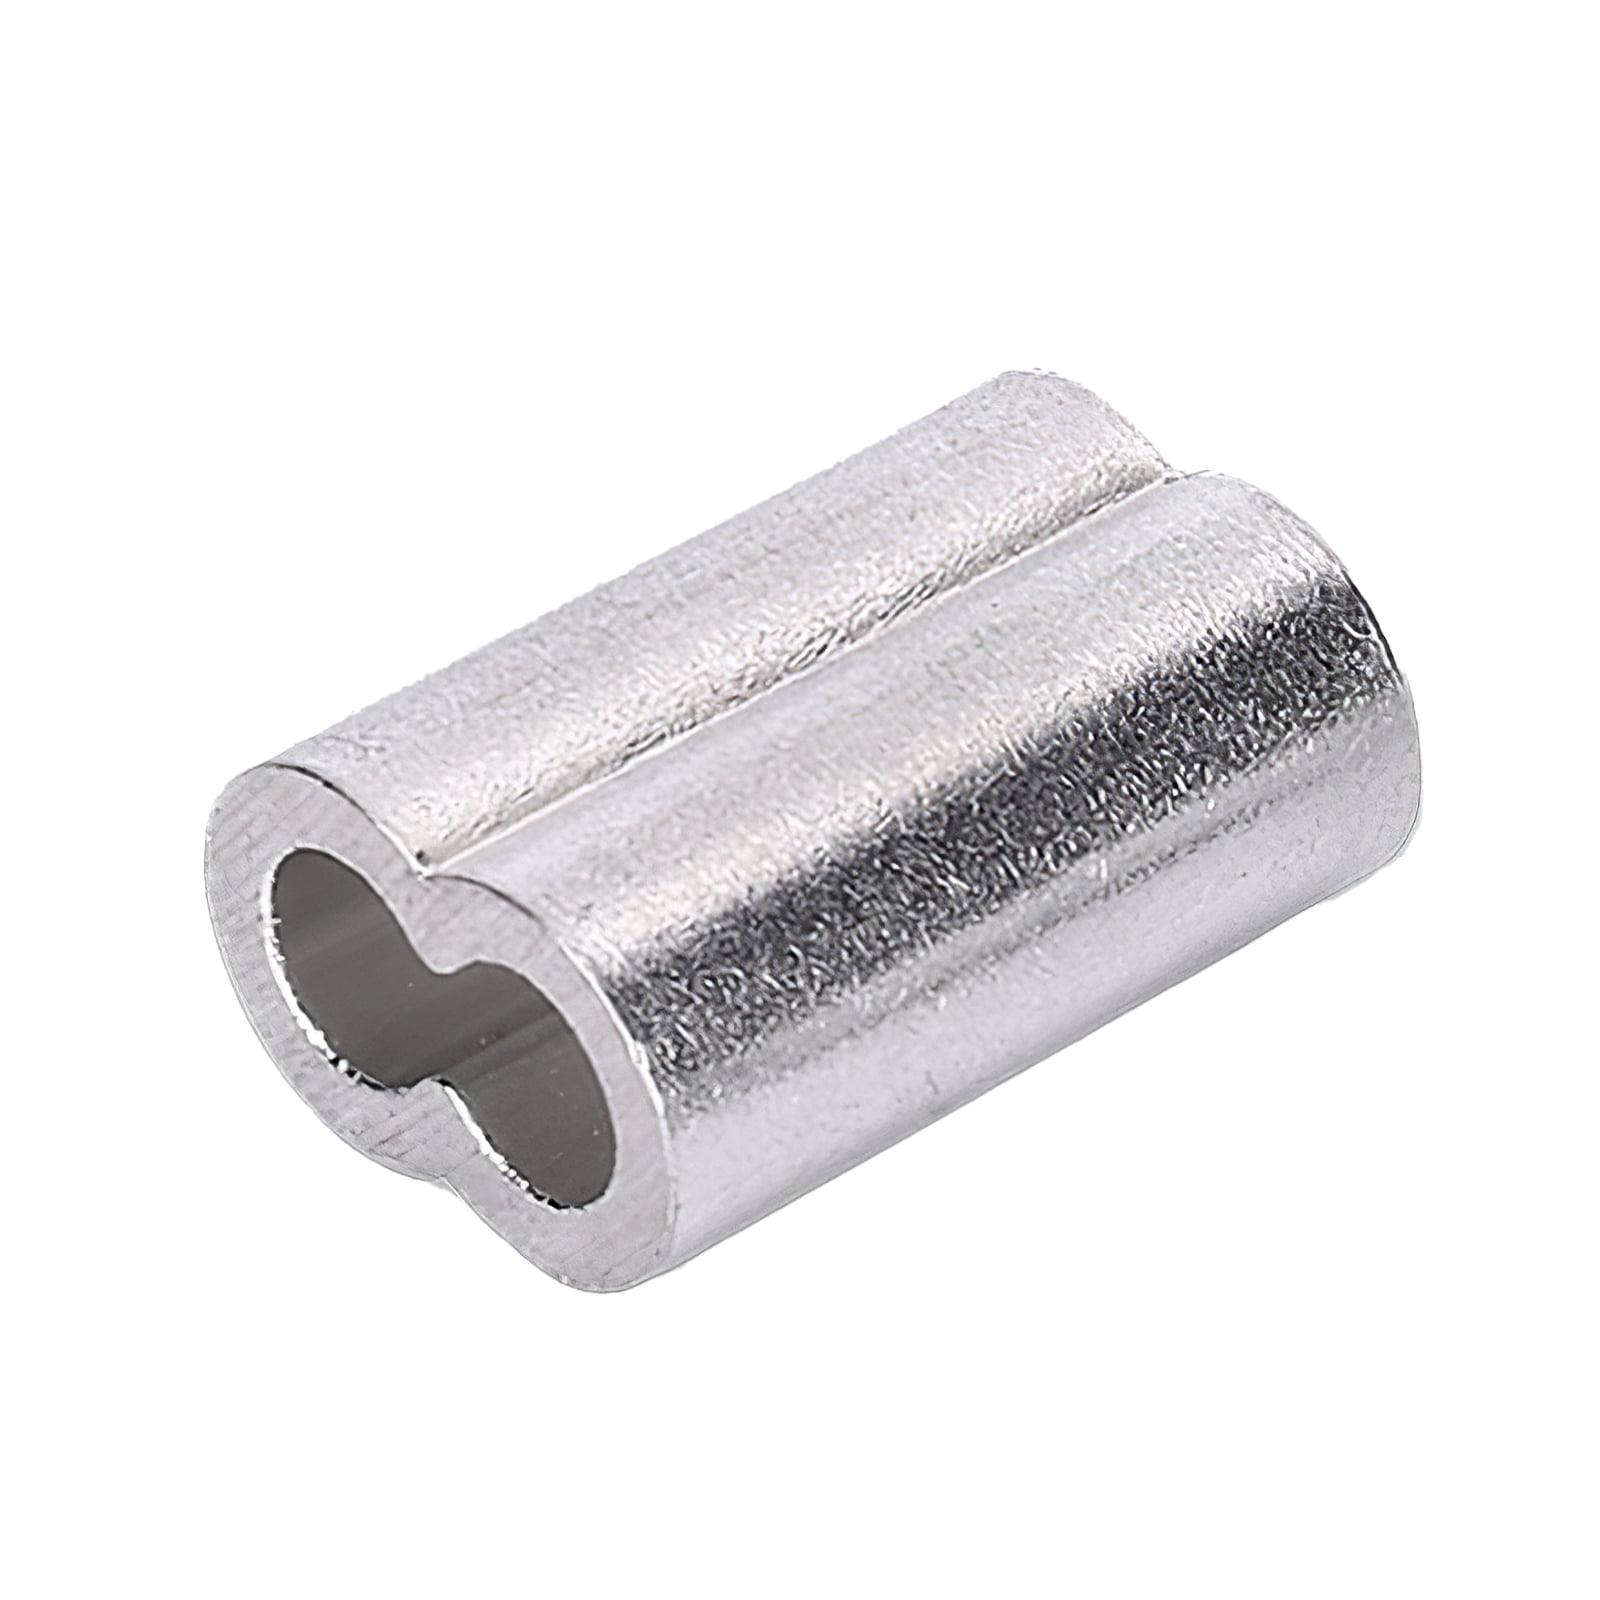 5mm Glarks 50Pcs 3/16 3/16-50Pcs Aluminum Crimping Loop Sleeve Wire Rope Sleeves Double Barrel Ferrule for Wire Rope and Cable Line End 